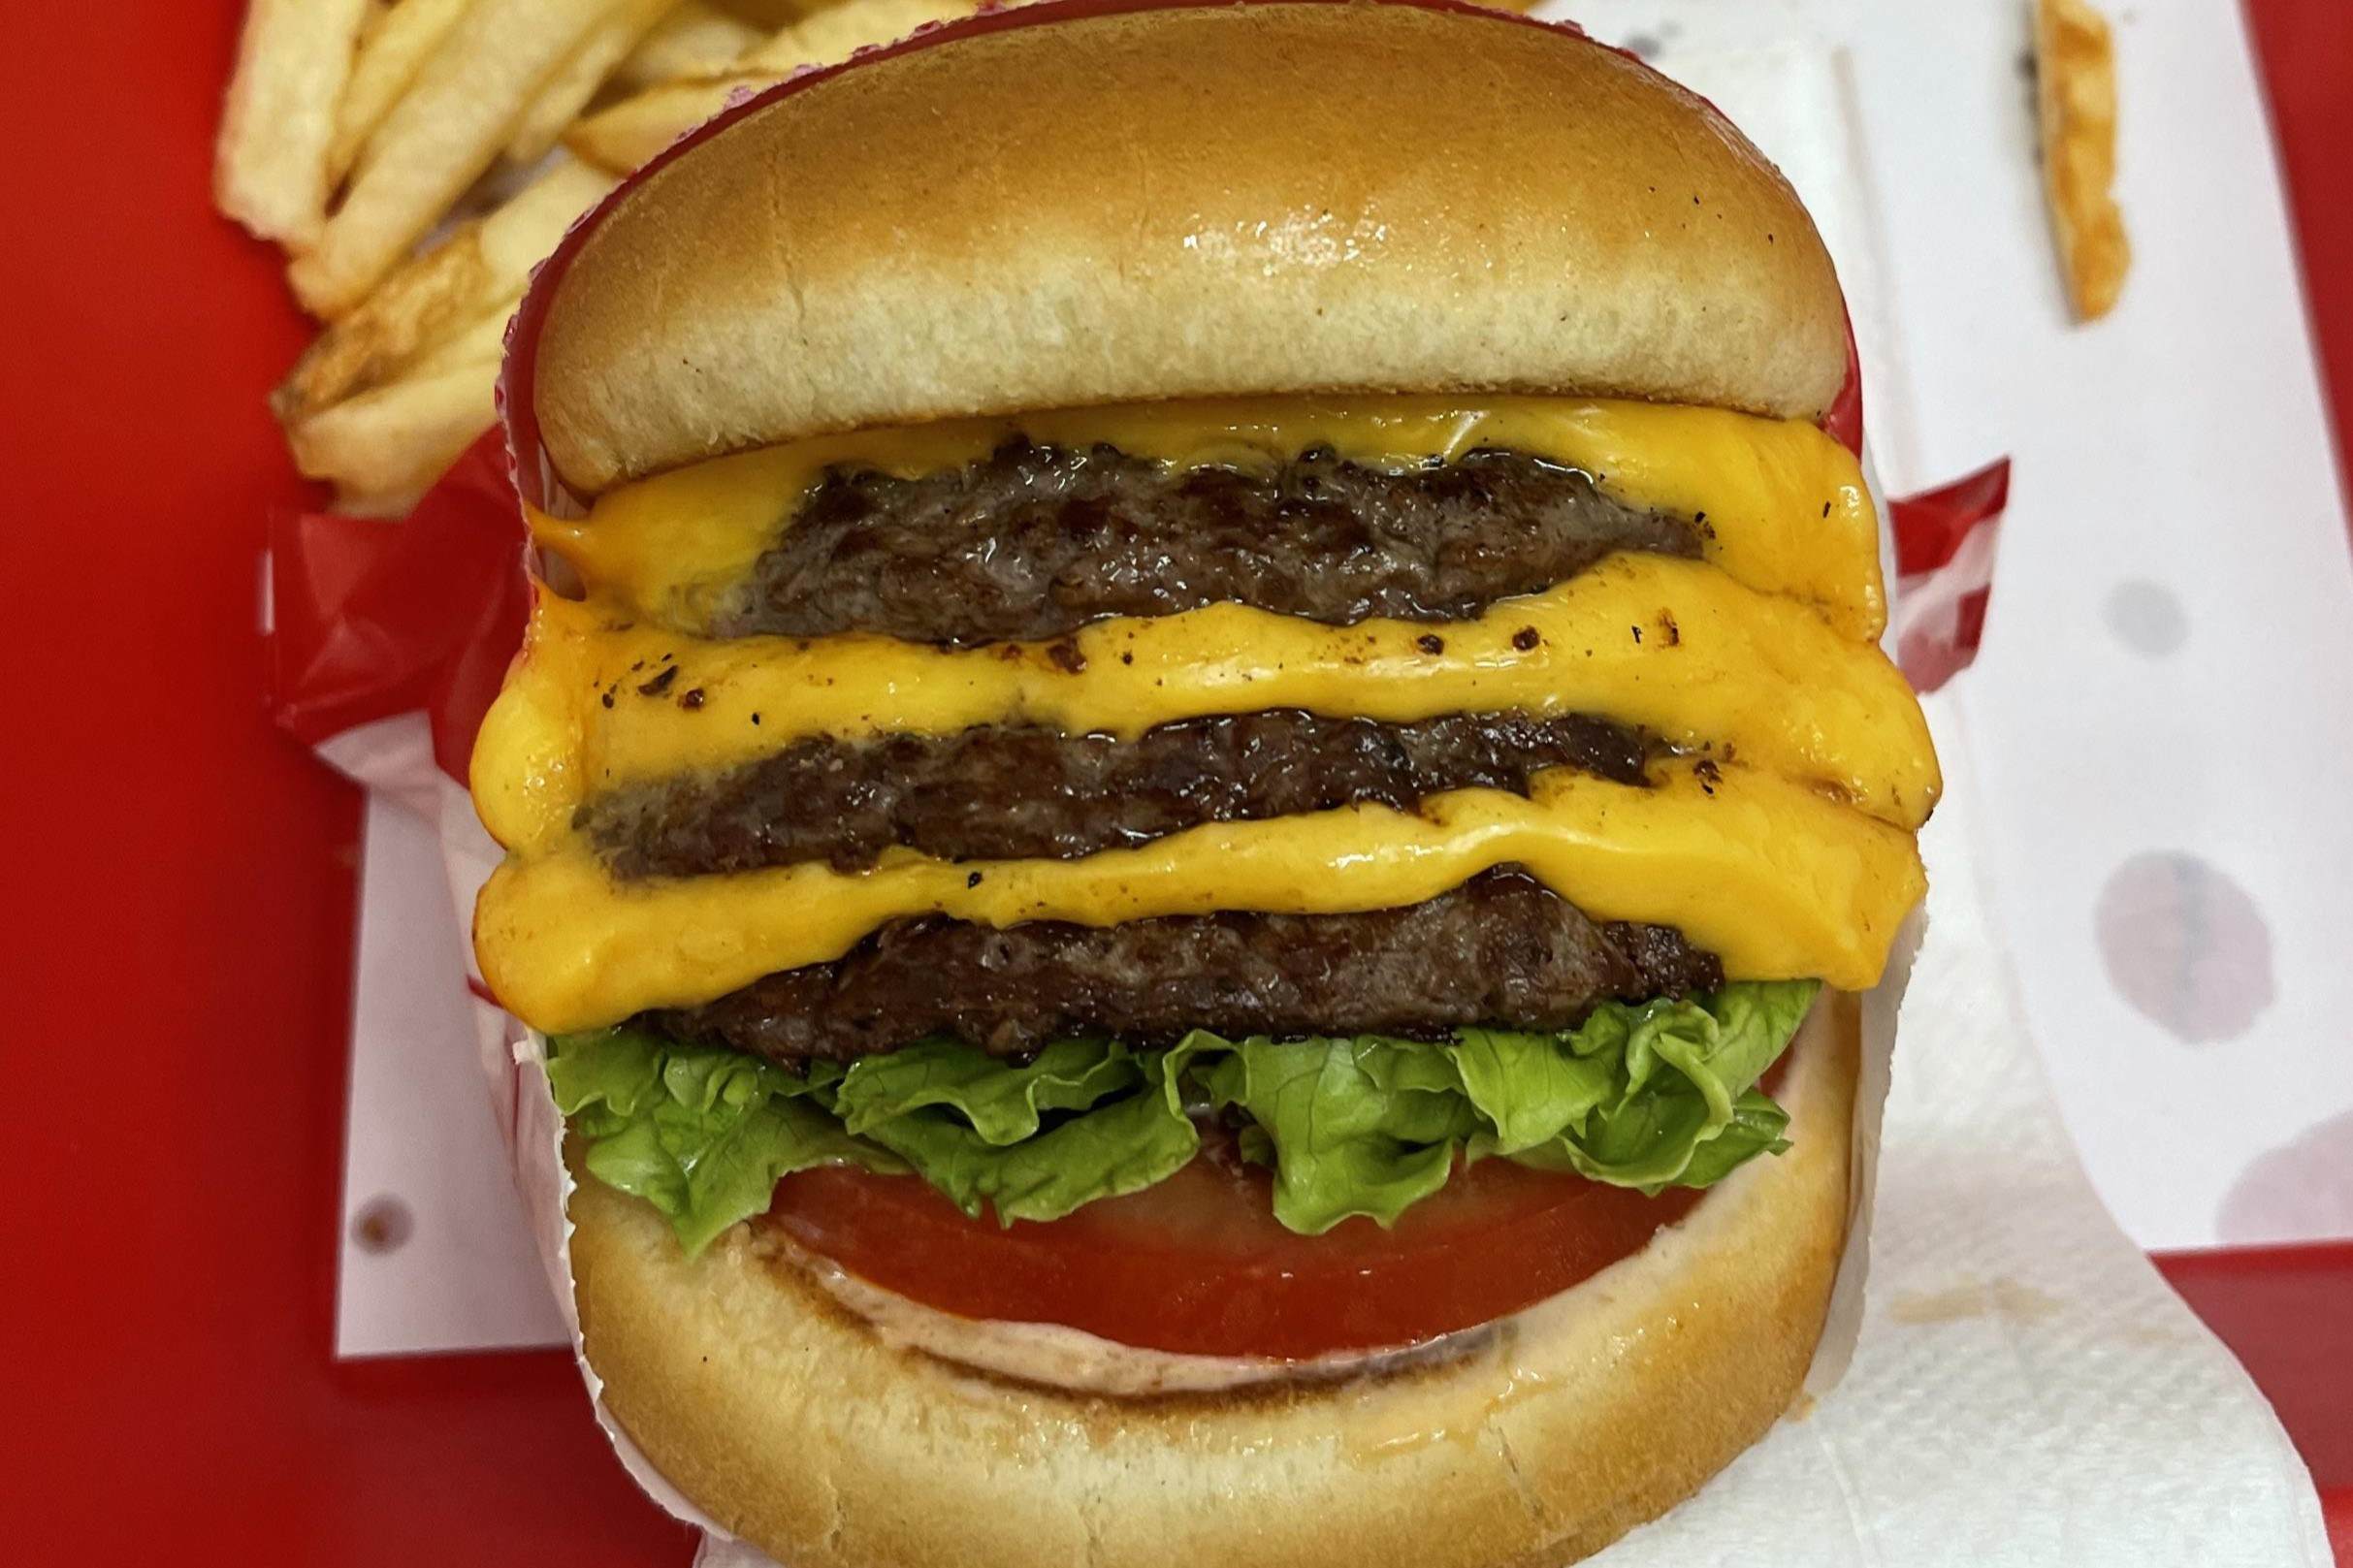 18-in-n-out-3x3-nutrition-facts